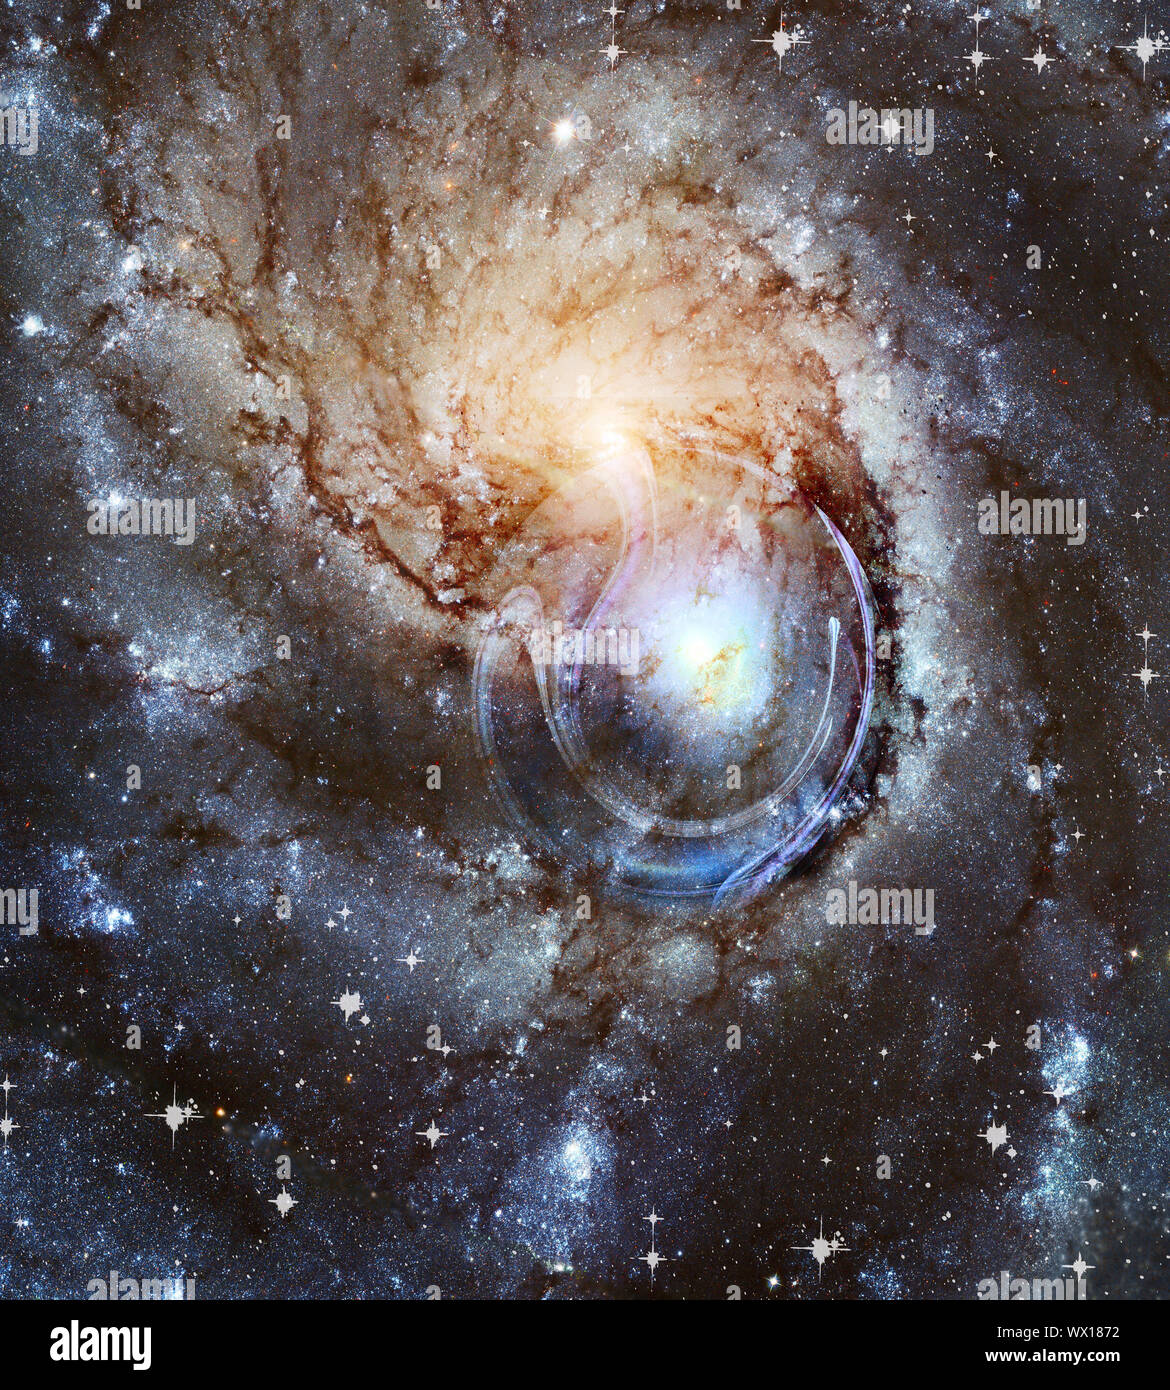 A spiral Galaxy in the Universe. Stock Photo